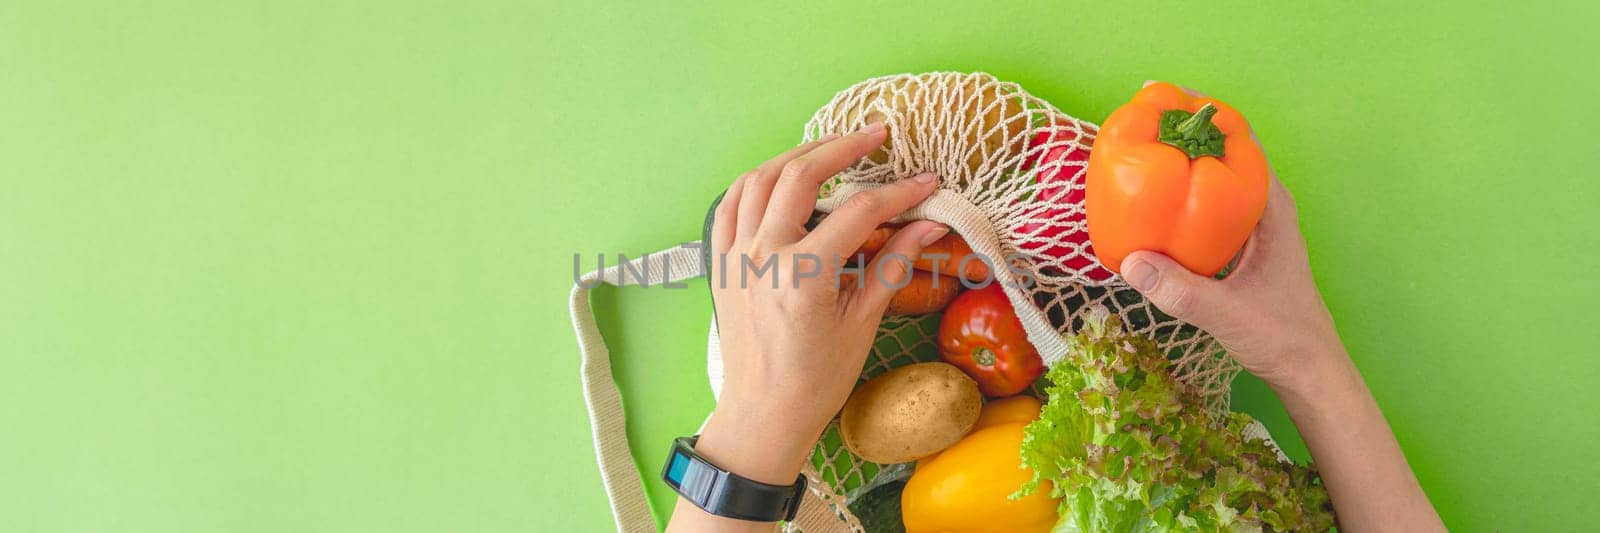 banner of top view of a woman's hands taking vegetables out of an eco-bag. tomatoes, cucumbers, bell peppers and lettuce in a reusable bag. The concept of recycling, respect for nature. flat lay, copy space.